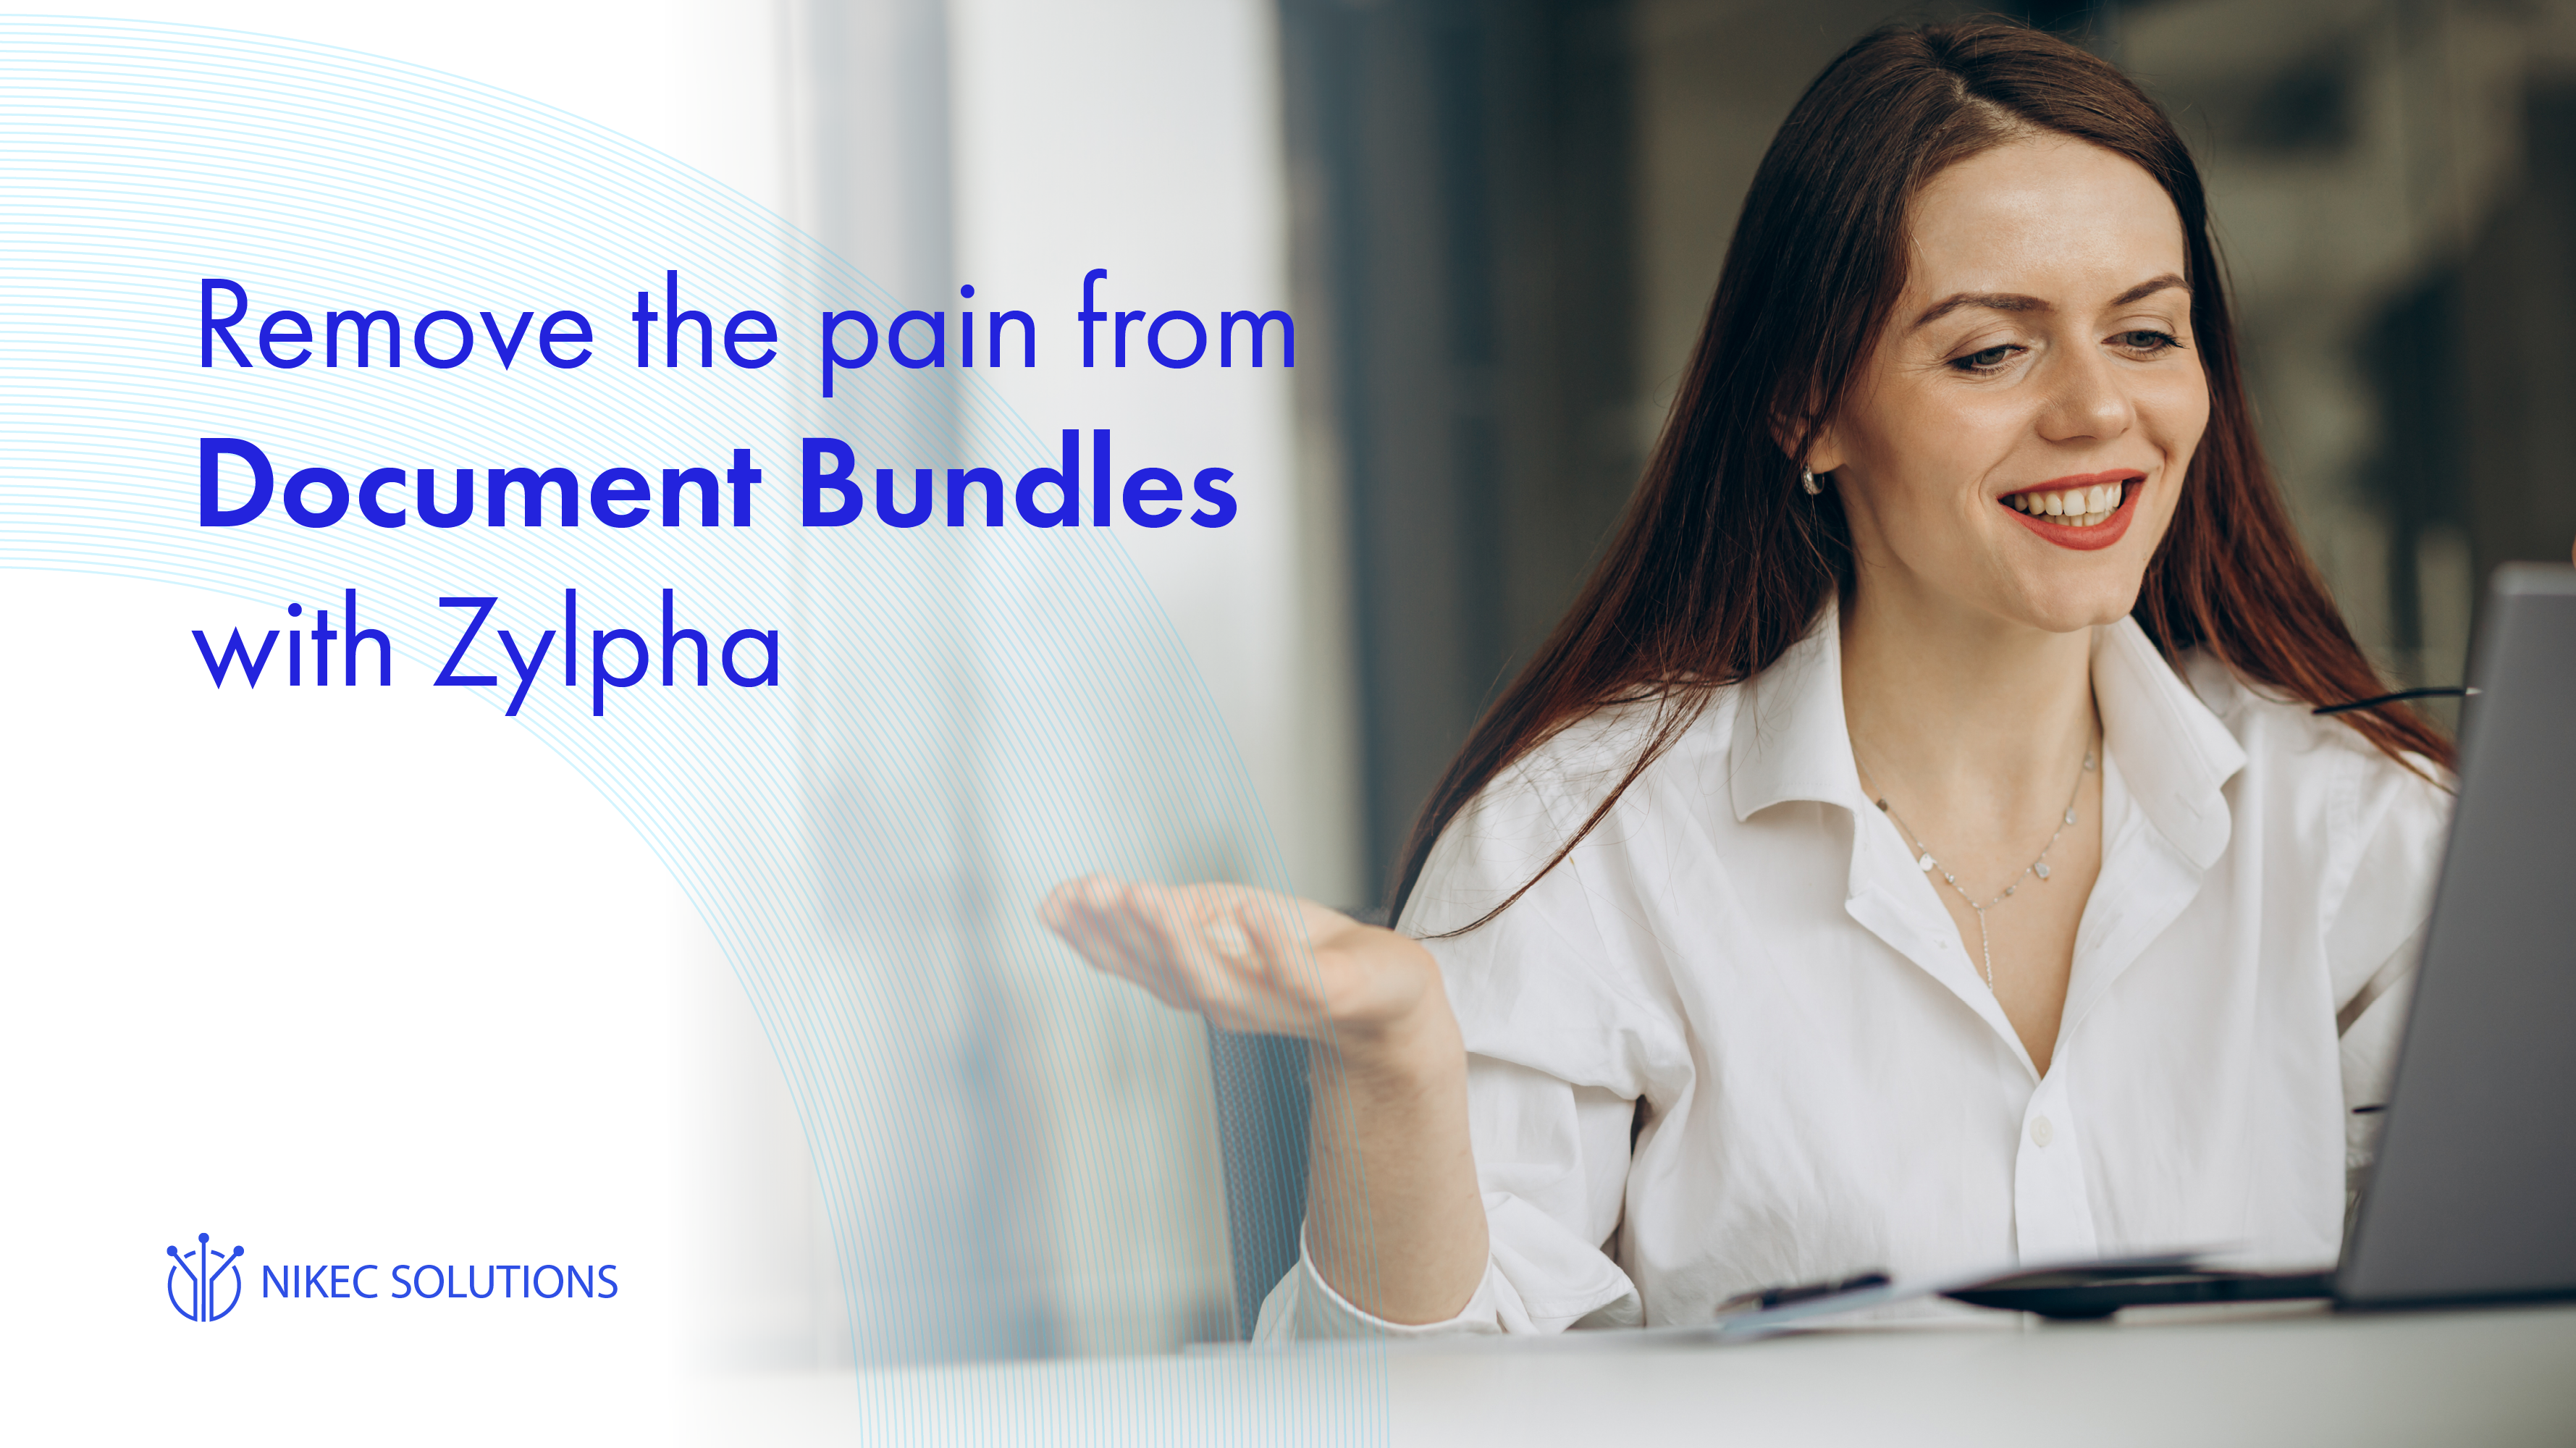 Remove the pain from Document Bundles - how creating document Bundles can be a simple process, rather than an administrative headache.